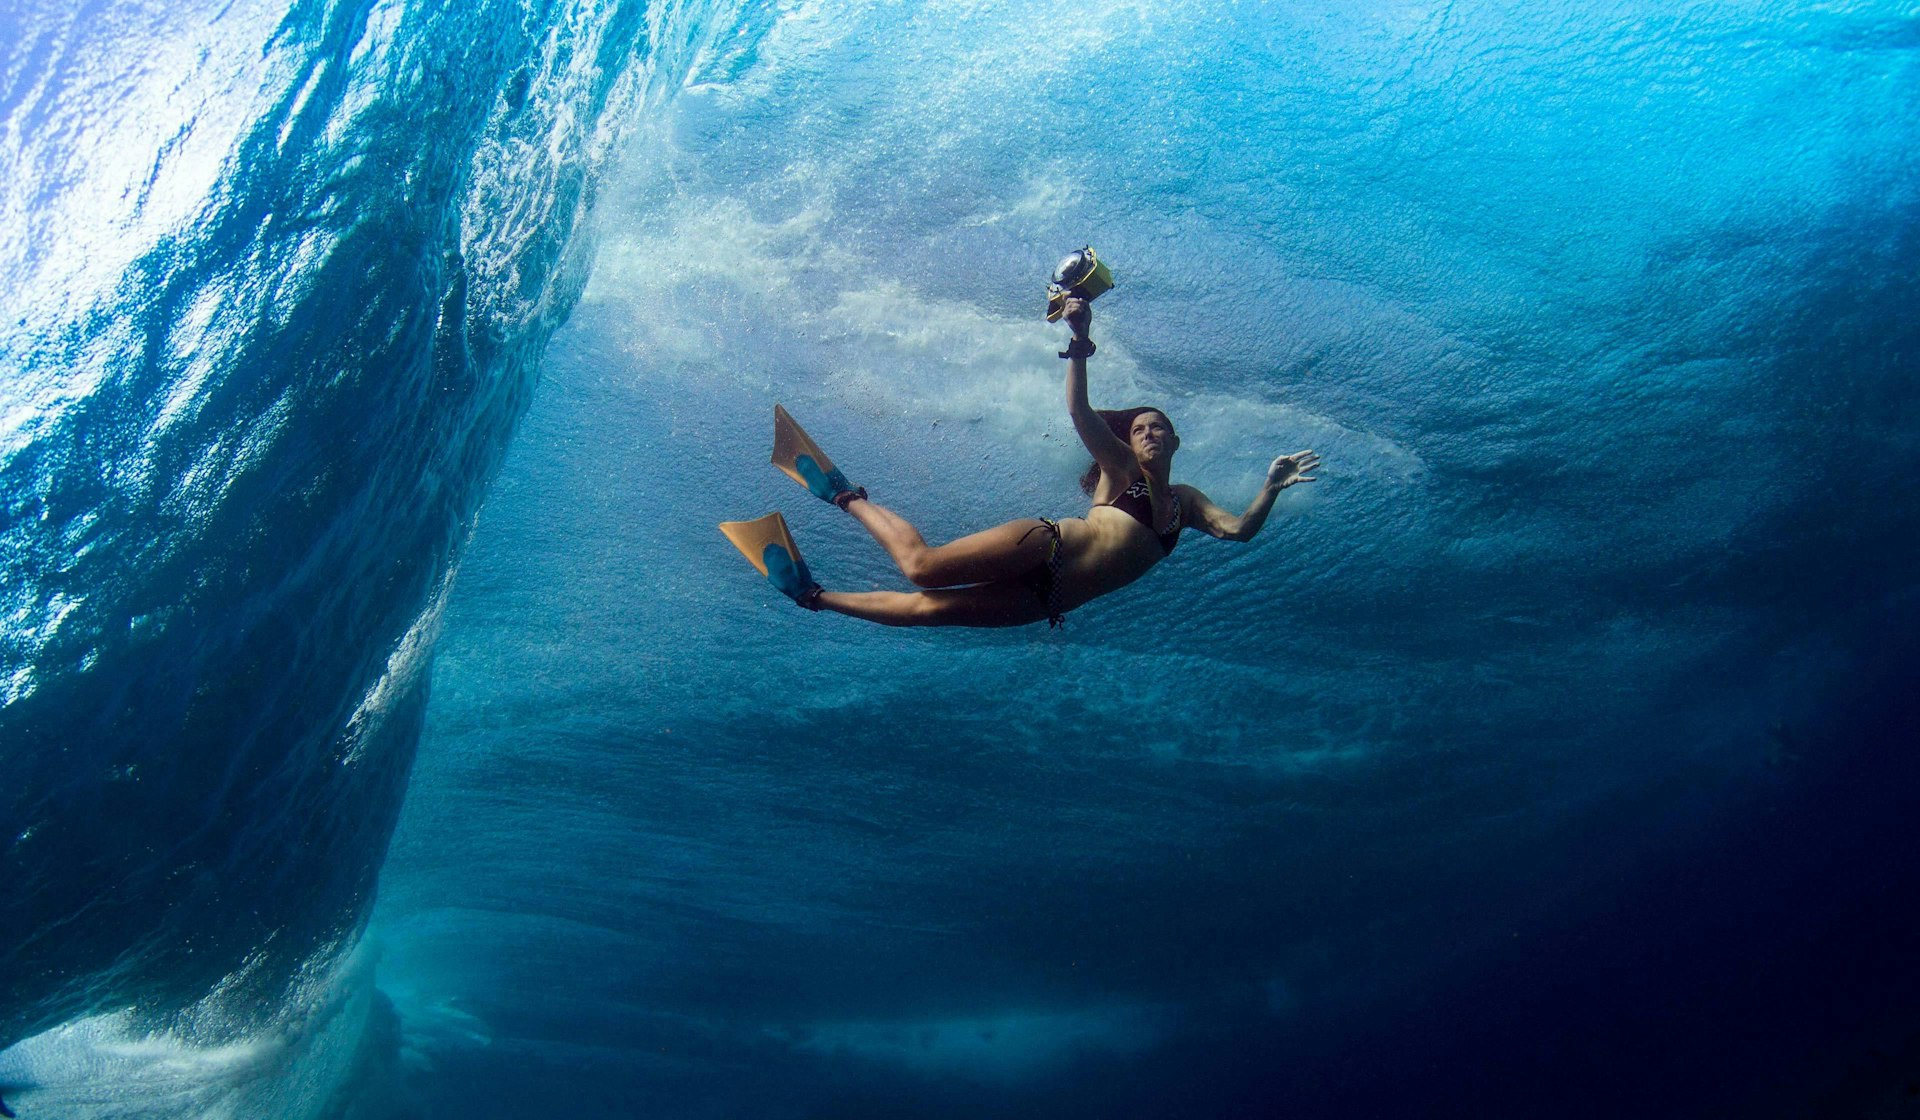 How Lucia Griggi chased deadly waves to become one of the world’s best surf photographers